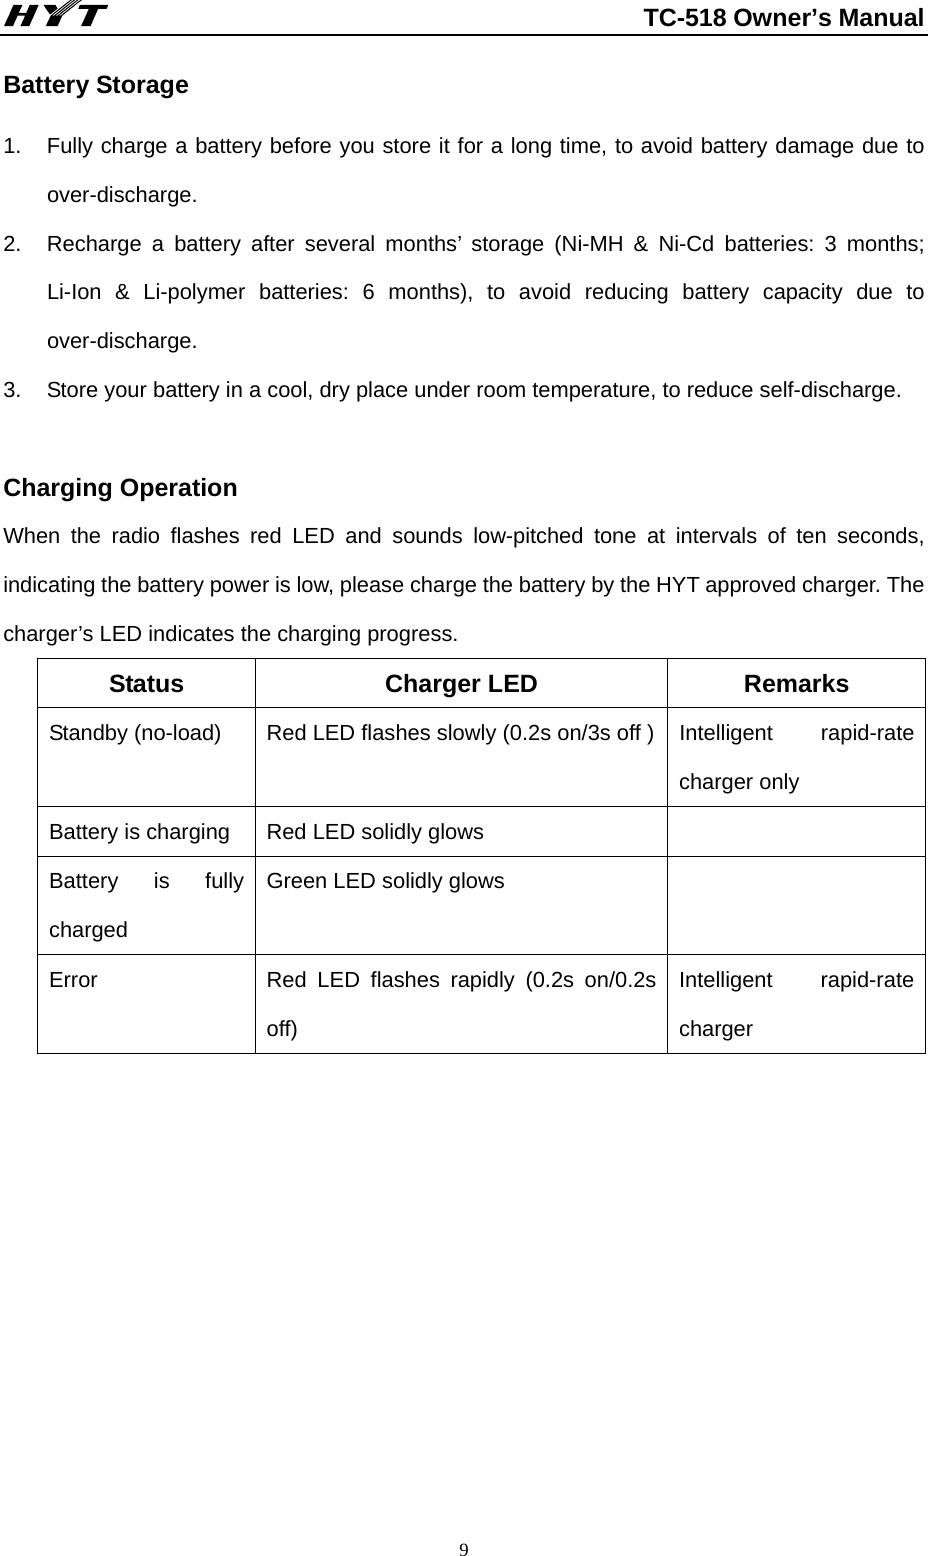                                                          TC-518 Owner’s Manual  9Battery Storage 1.  Fully charge a battery before you store it for a long time, to avoid battery damage due to over-discharge. 2.  Recharge a battery after several months’ storage (Ni-MH &amp; Ni-Cd batteries: 3 months; Li-Ion &amp; Li-polymer batteries: 6 months), to avoid reducing battery capacity due to over-discharge.  3.  Store your battery in a cool, dry place under room temperature, to reduce self-discharge.  Charging Operation   When the radio flashes red LED and sounds low-pitched tone at intervals of ten seconds, indicating the battery power is low, please charge the battery by the HYT approved charger. The charger’s LED indicates the charging progress. Status Charger LED  Remarks Standby (no-load)  Red LED flashes slowly (0.2s on/3s off ) Intelligent  rapid-rate charger only Battery is charging  Red LED solidly glows   Battery is fully charged Green LED solidly glows   Error  Red LED flashes rapidly (0.2s on/0.2s off)   Intelligent rapid-rate charger           